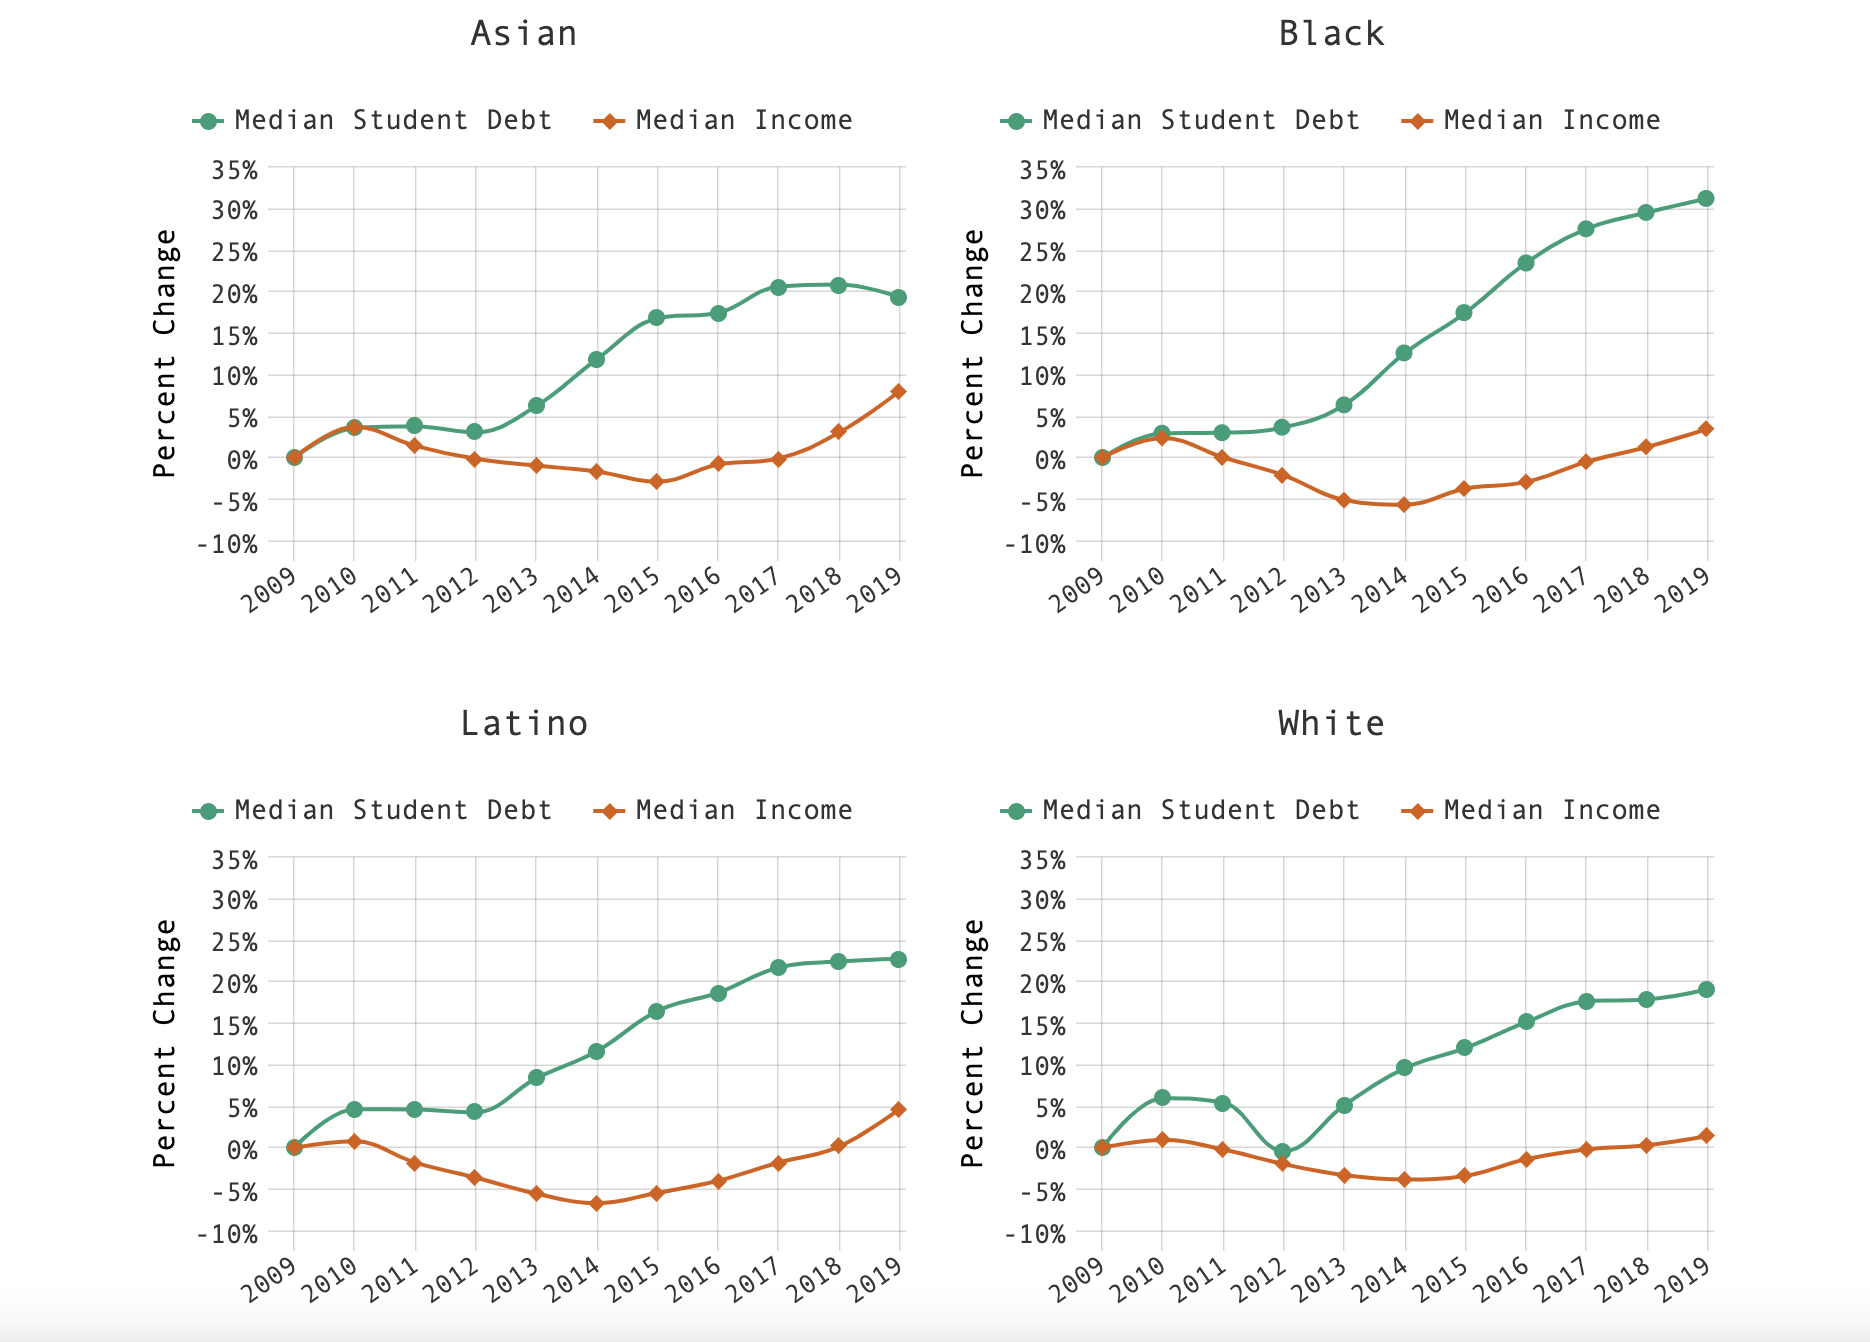 Four line graphs (Asian, Black, Latino, and White) showing the gap between the percentage change in incoming and student debt from 2009 to 2019. 